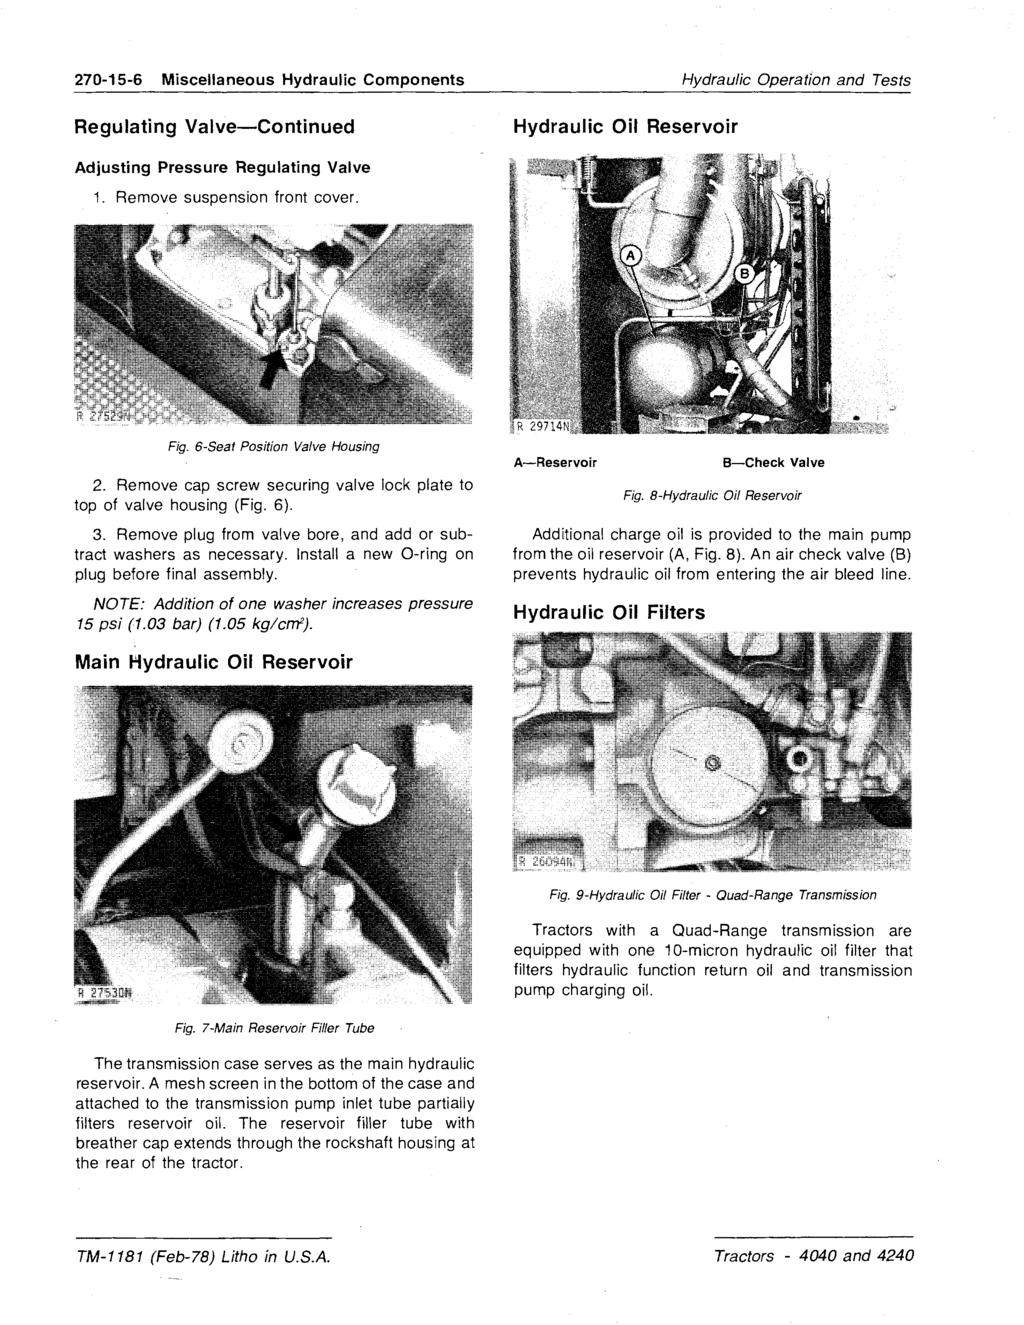 270-15-6 Miscellaneous Hydraulic Components Regulating Valve-Continued Hydraulic Oil Reservoir Hydraulic Operation and Tests Adjusting Pressure Regulating Valve 1. Remove suspension front cover. Fig.